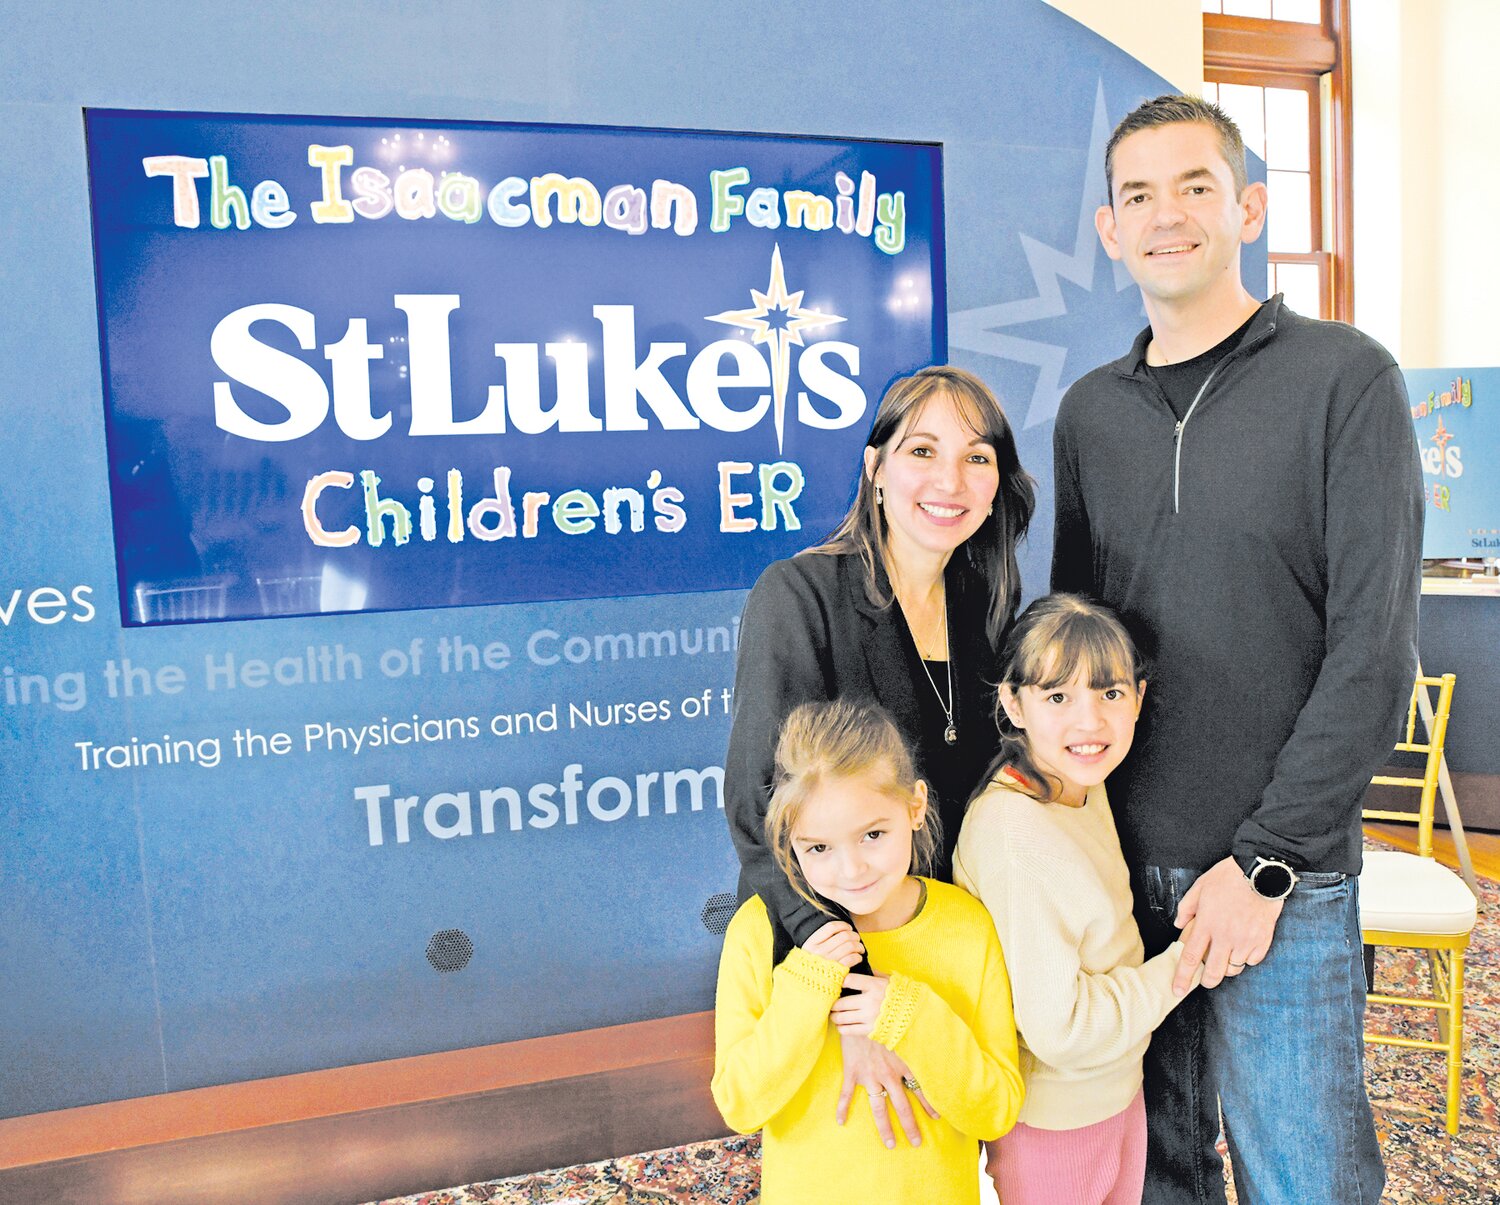 Jared and Monica Isaacman and their children at the Oct. 16 dedication of the new Isaacman Family Children’s Emergency Room at St. Luke’s Children’s Hospital in Bethlehem.